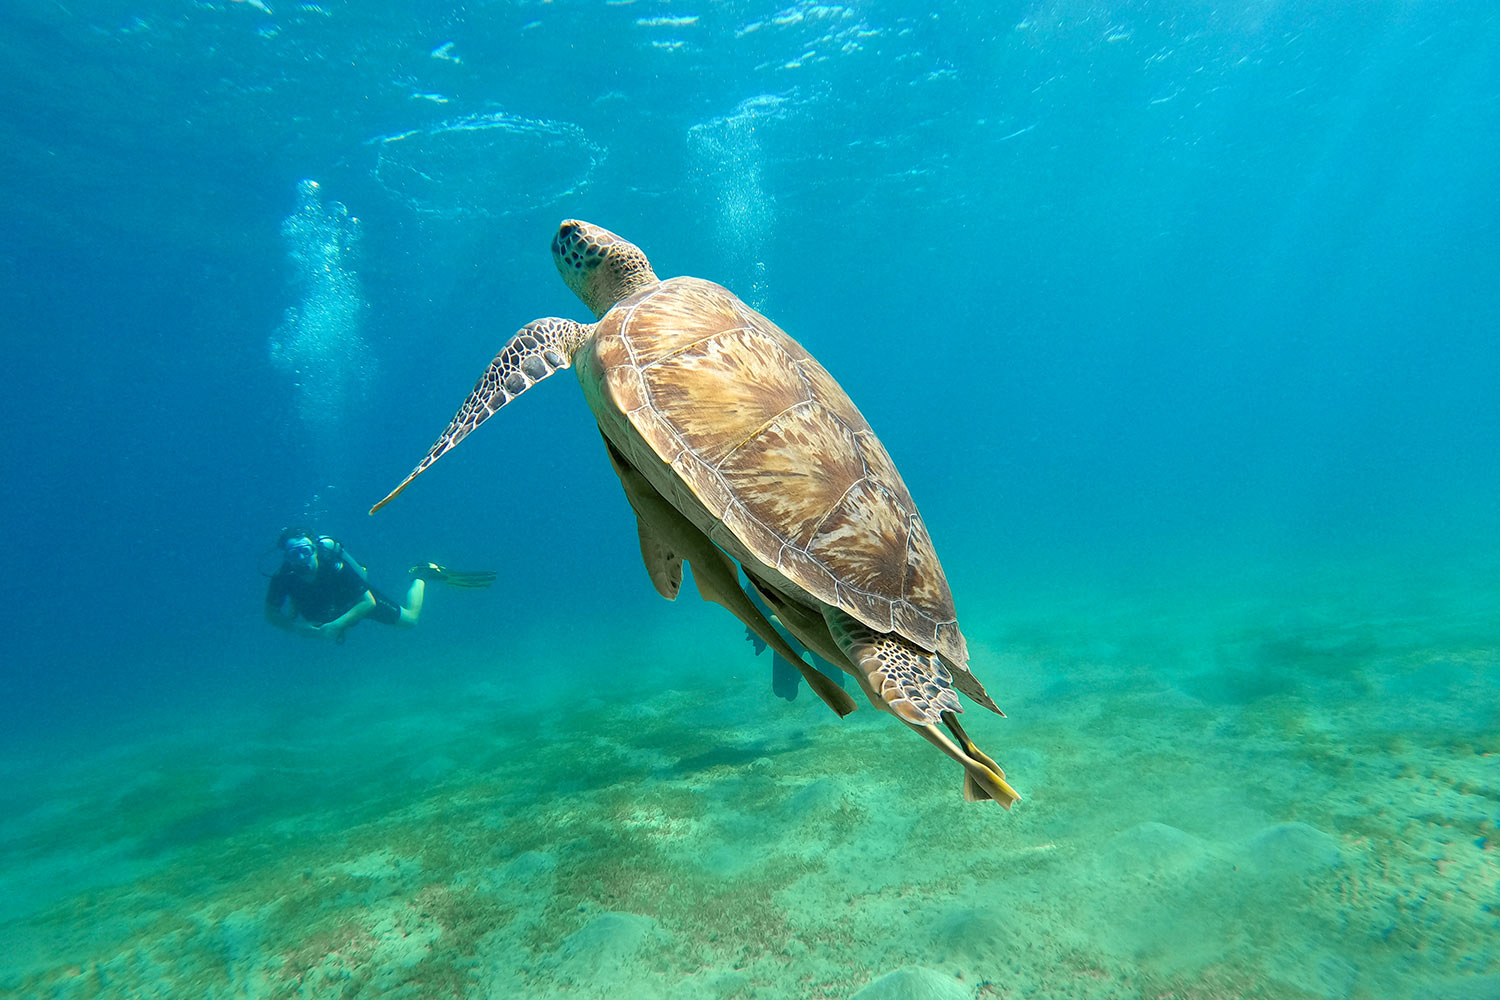 Plongée, Tortue, Mer Rouge, Égypte / Diving, Turtle, Red Sea, Egypt